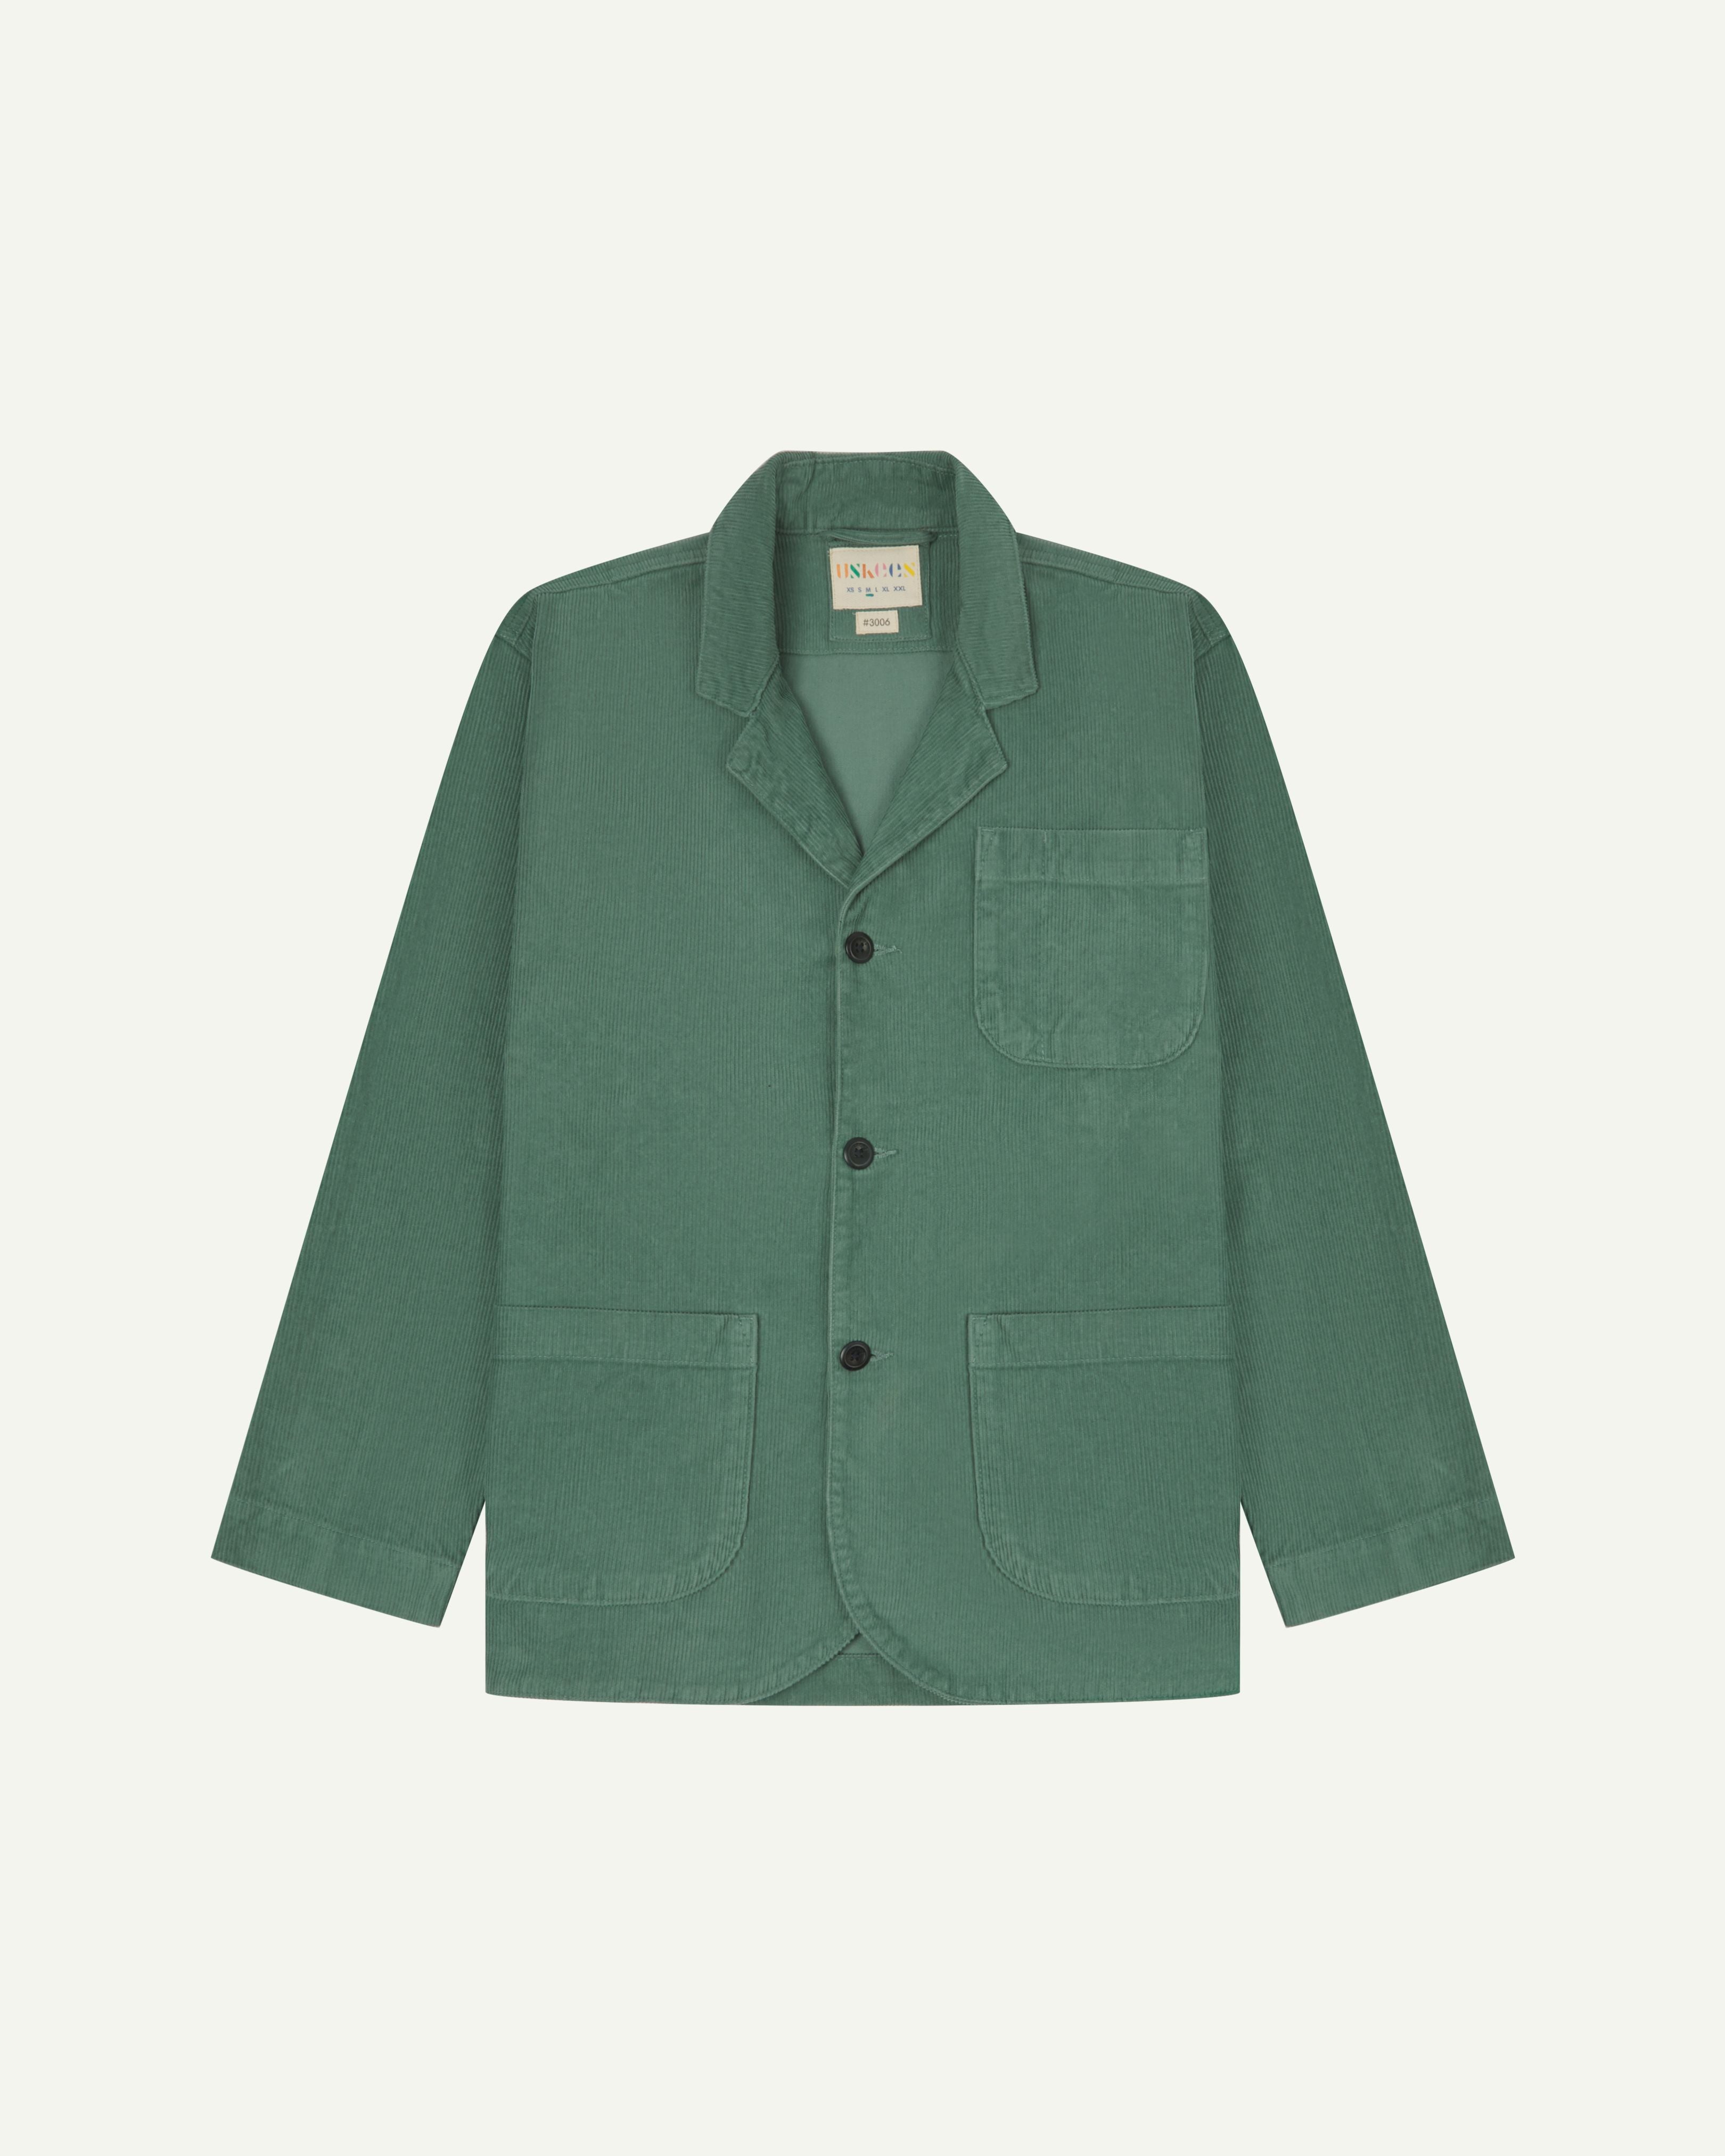 Front view of eucalyptus-green corduroy blazer with view of 3 patch pockets and Uskees branding label.